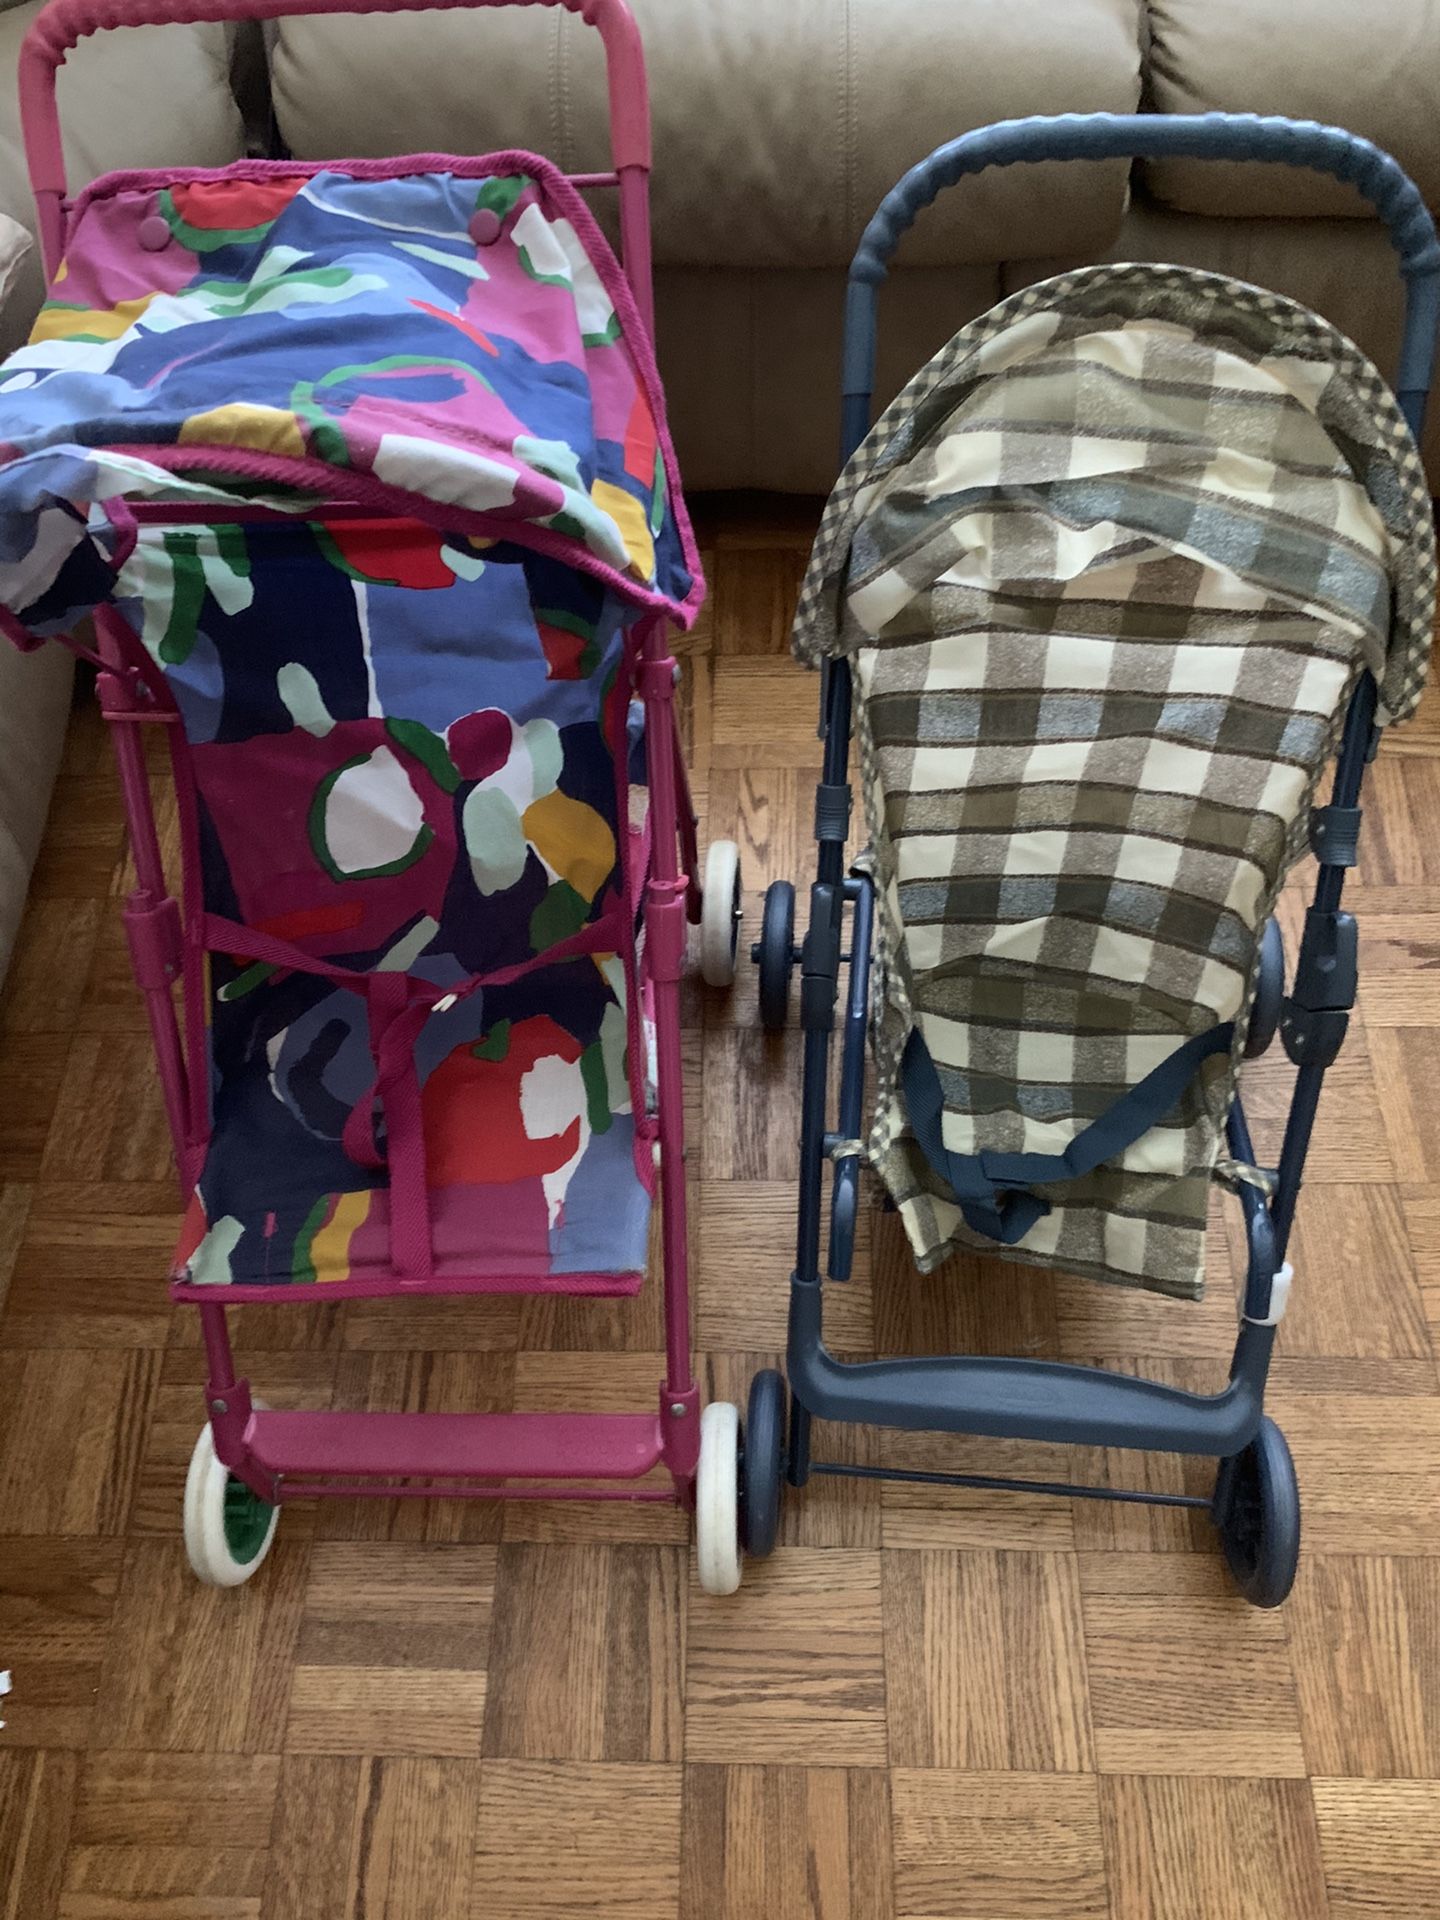 2 Graco doll toy stroller with crib